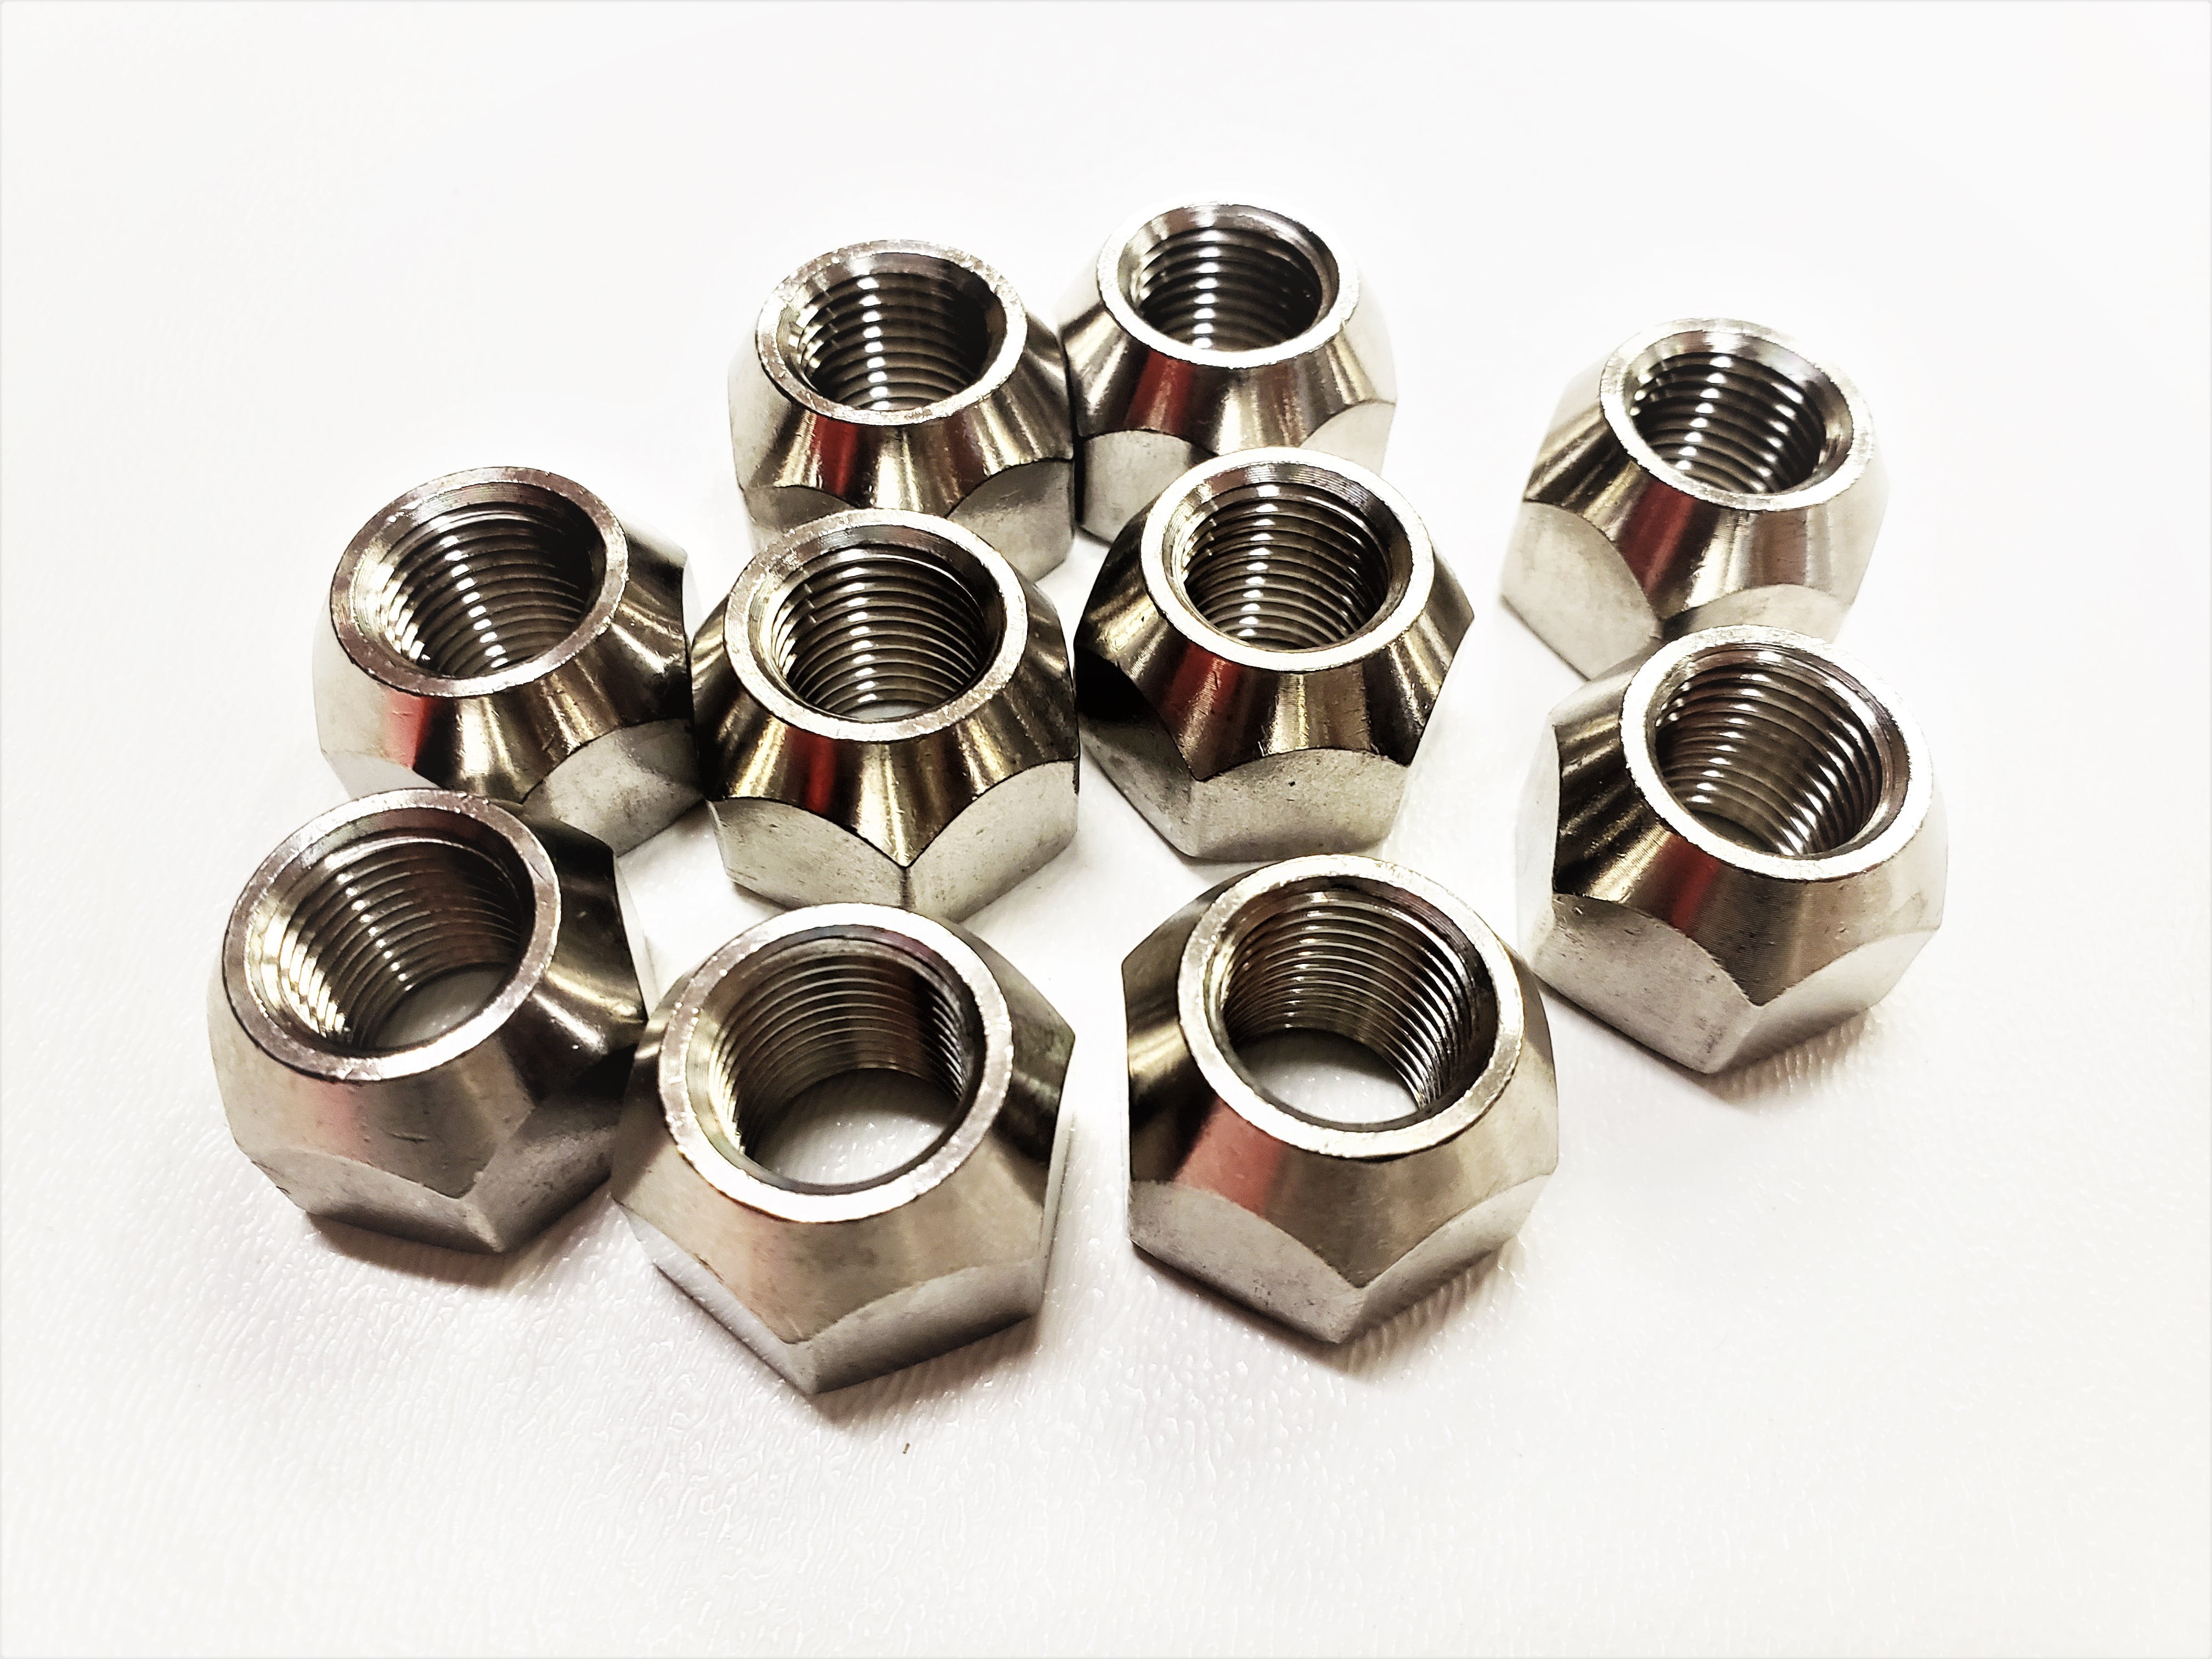 20 MAG LUG NUTS 1/2-20,10-OPEN,10 CLOSED CENTER LINE WESTERN US SLOTTED WHEELS